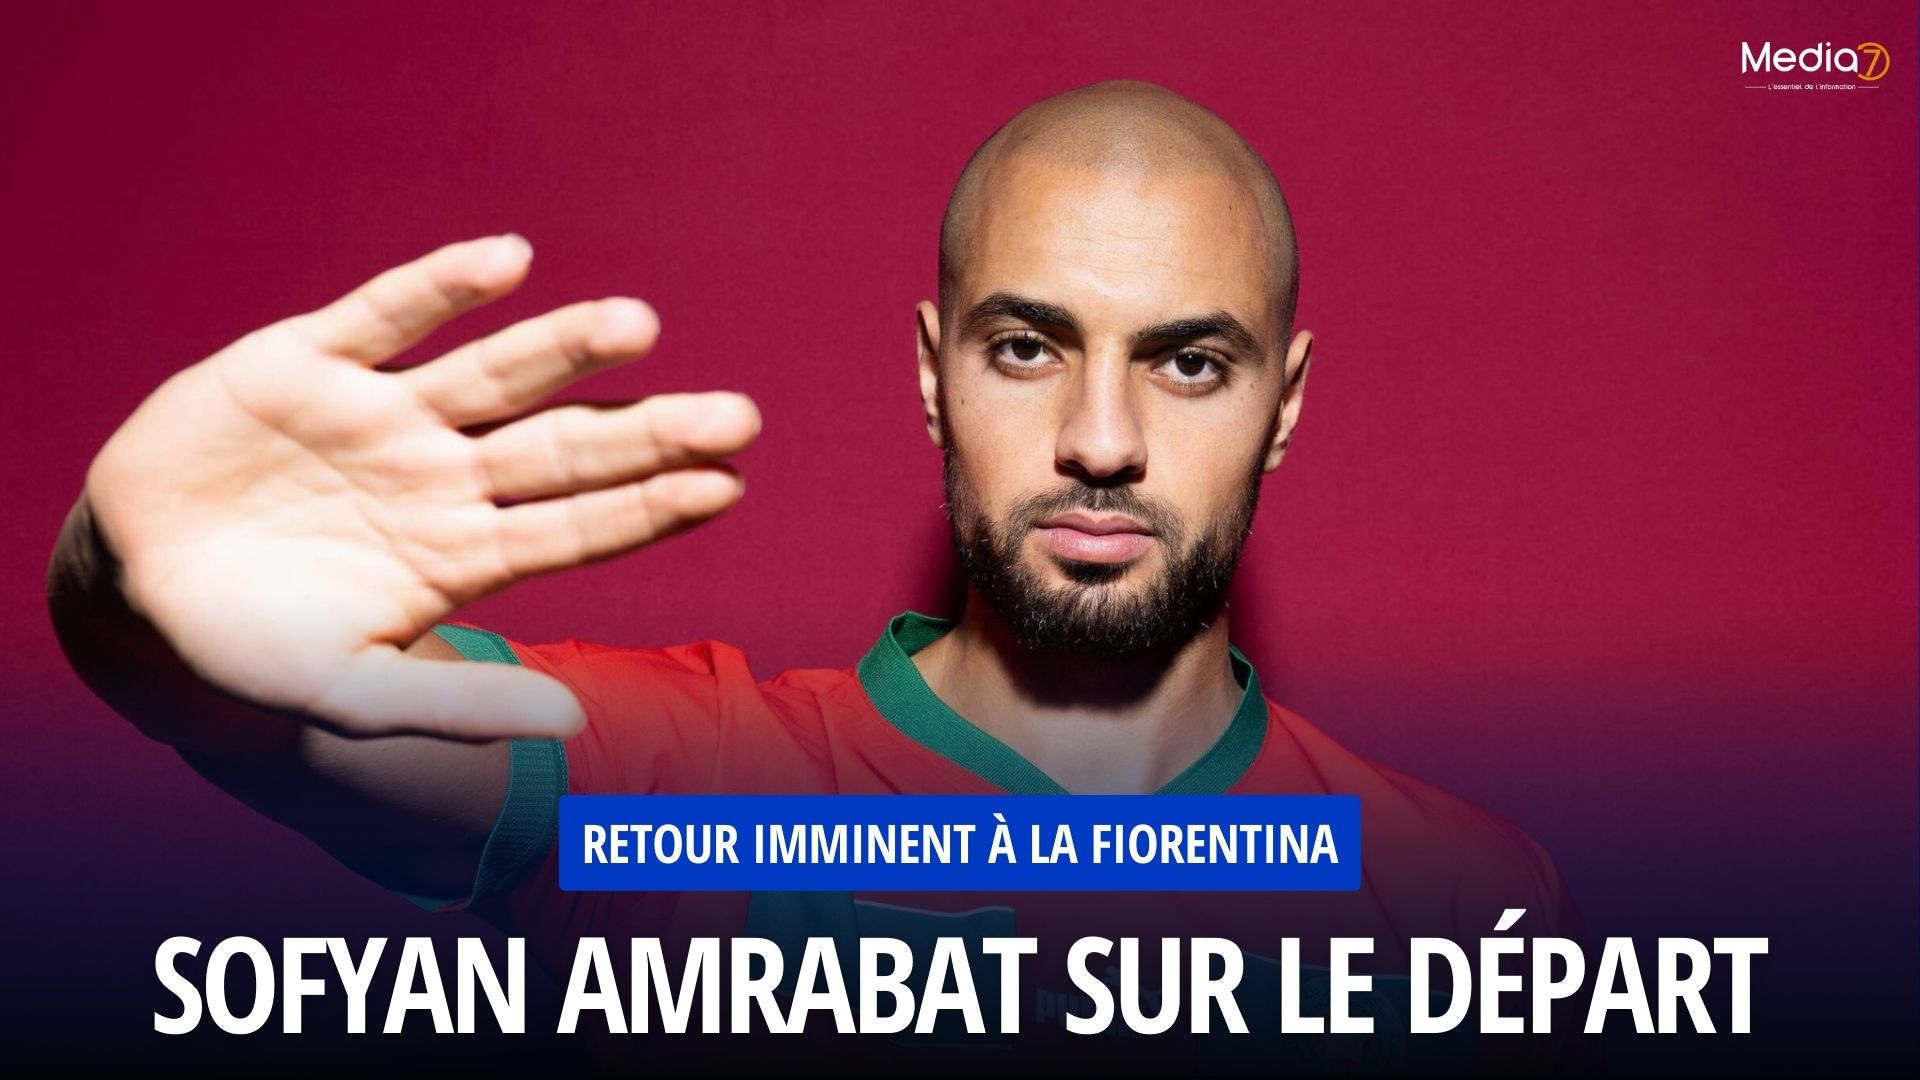 Sofyan Amrabat on Departure: Return to Fiorentina Imminent after Mixed Performance at Manchester United - Media7